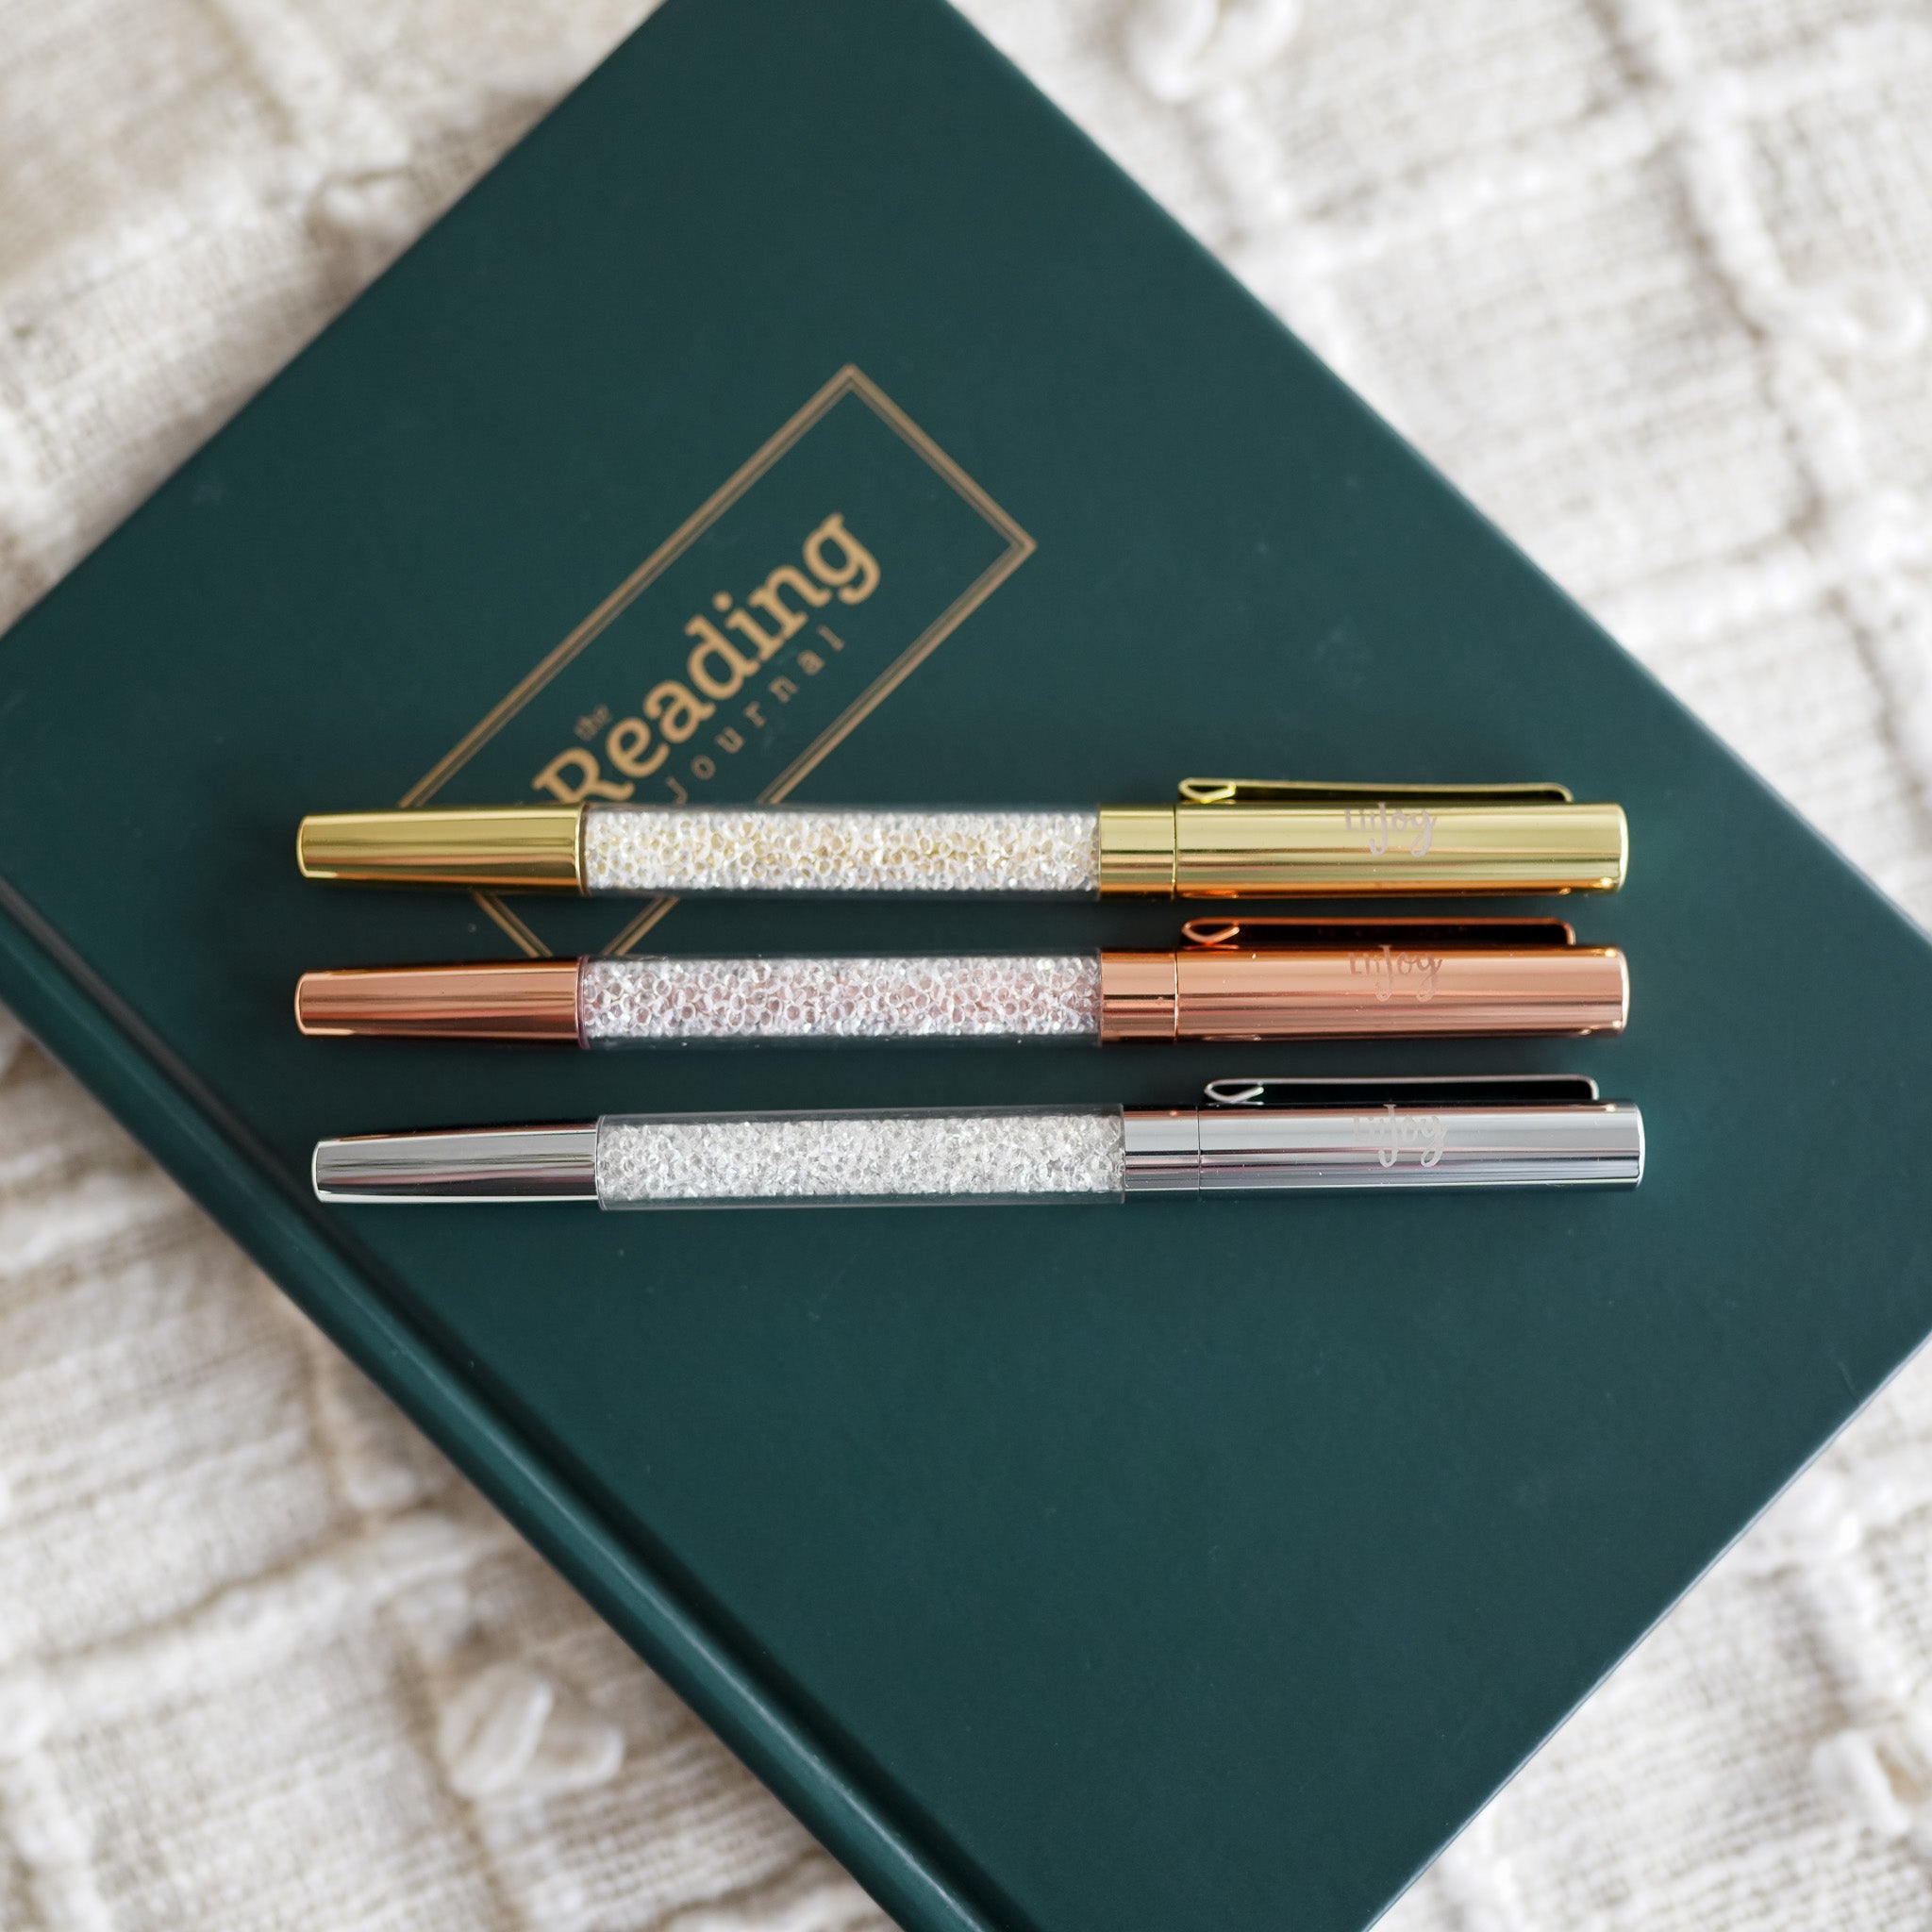 Crystal Pen with metallic details in gold, rose gold, and silver and LitJoy logo on the cap